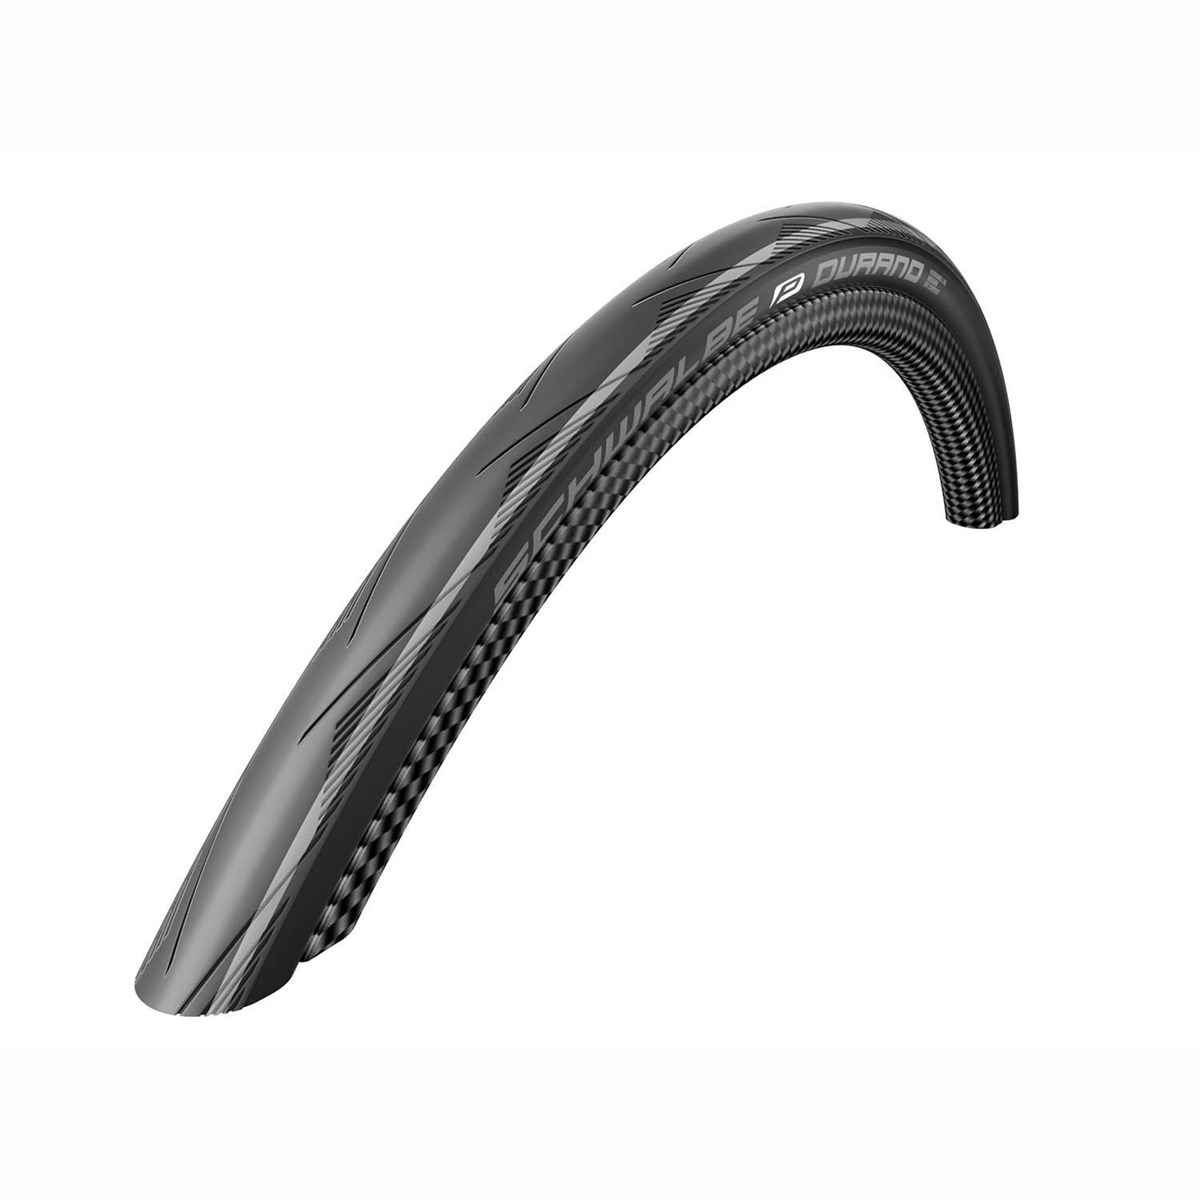 Schwalbe Durano S RaceGuard Dual Compound 700c Folding Tyre product image